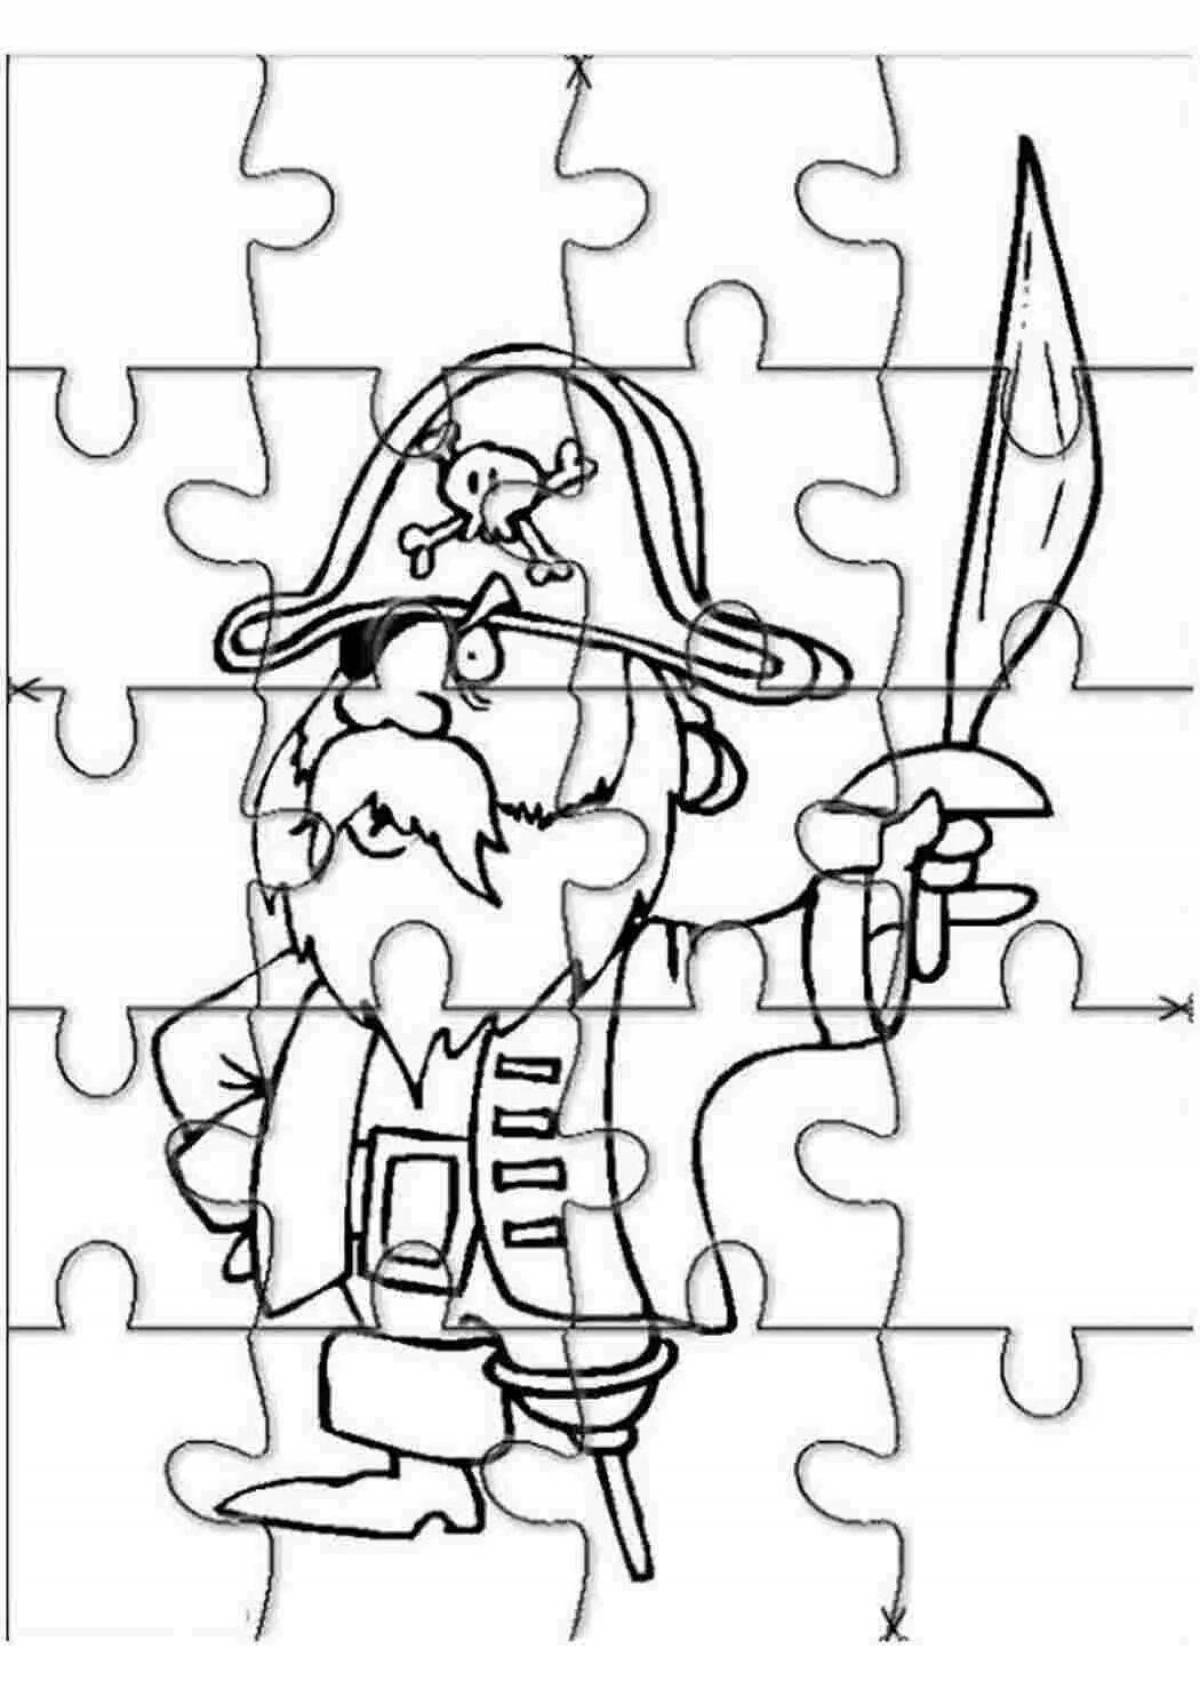 Creative children's puzzles for children 3-4 years old without registration